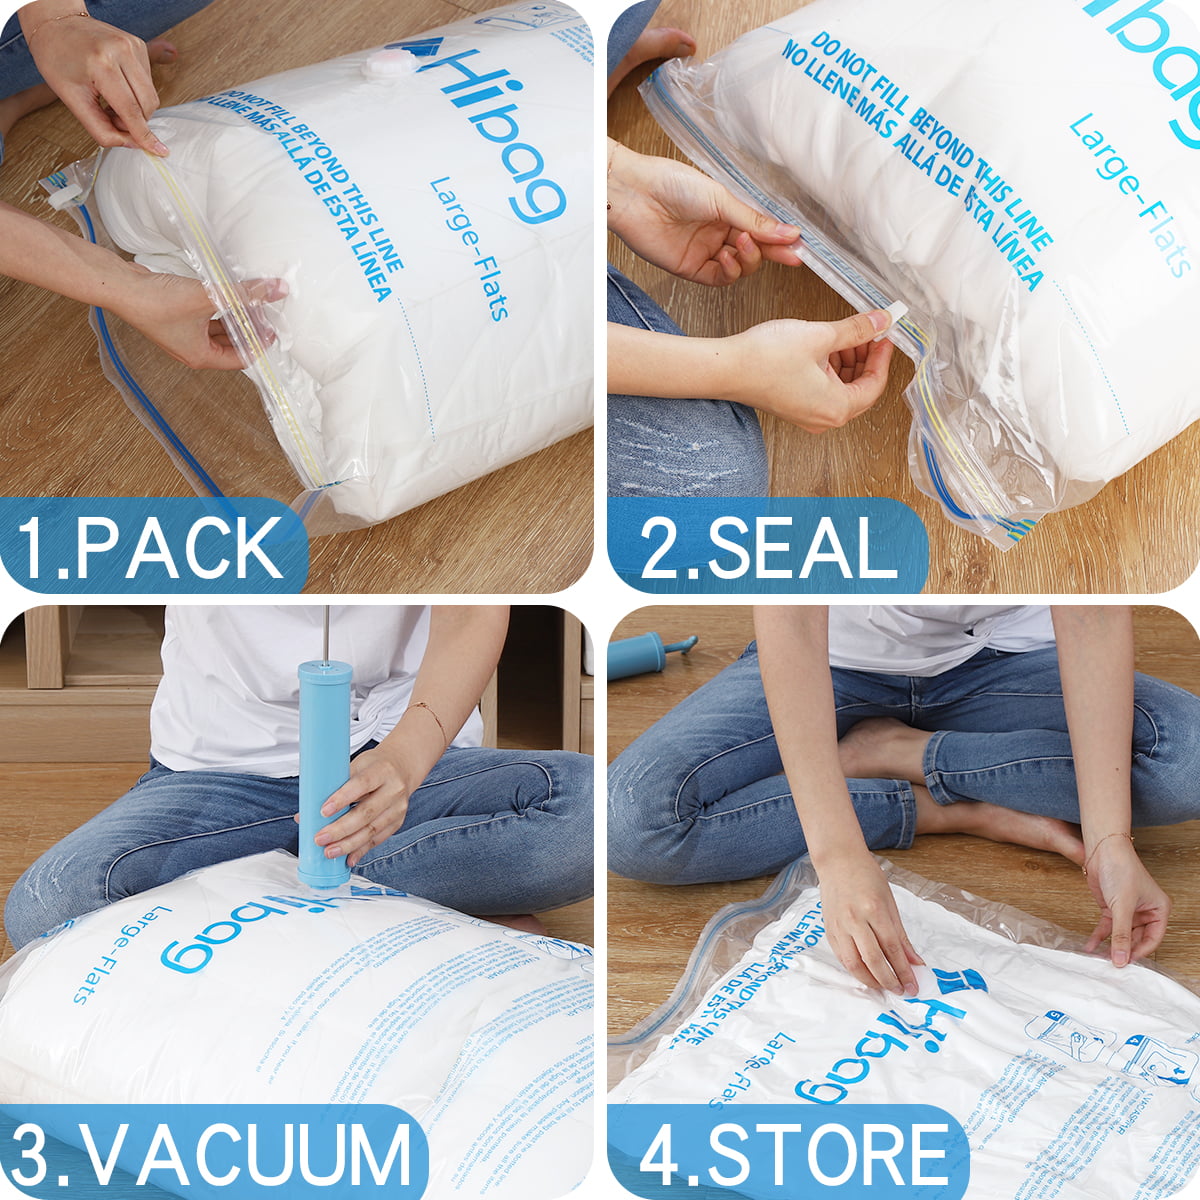 The Hibag Vacuum Storage Bags Are 50% Off at